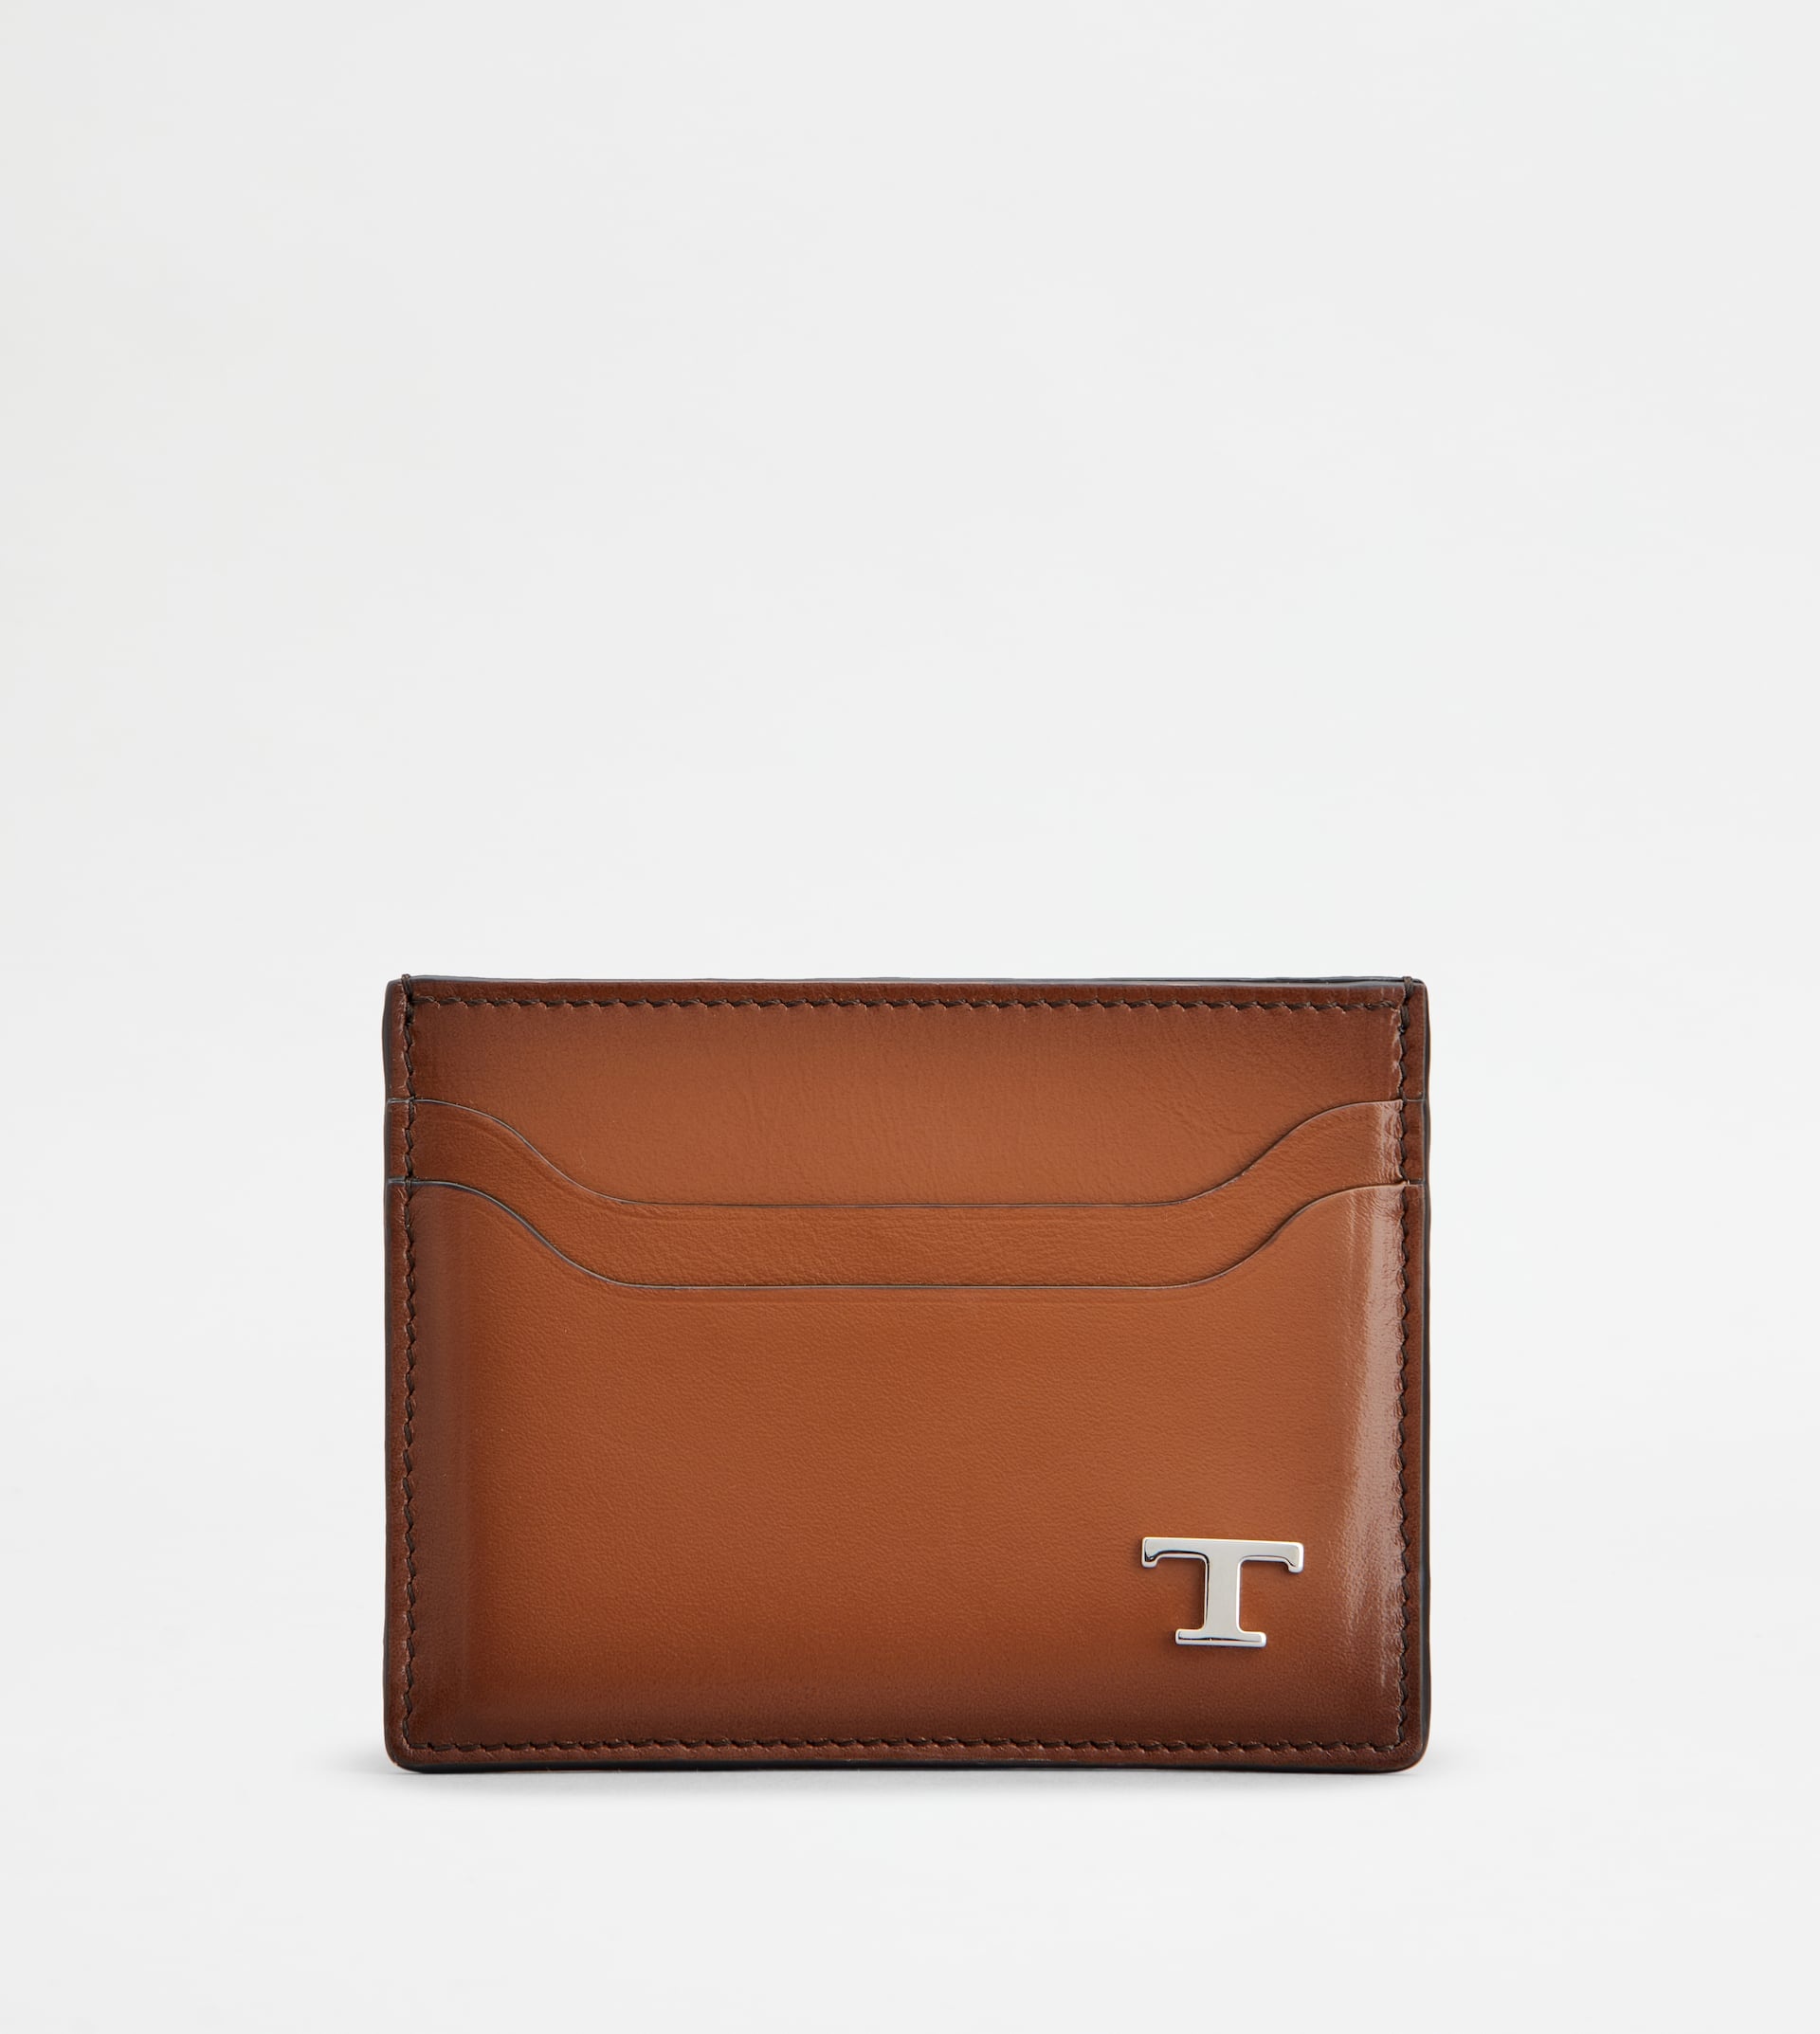 CREDIT CARD HOLDER IN LEATHER - BROWN - 1